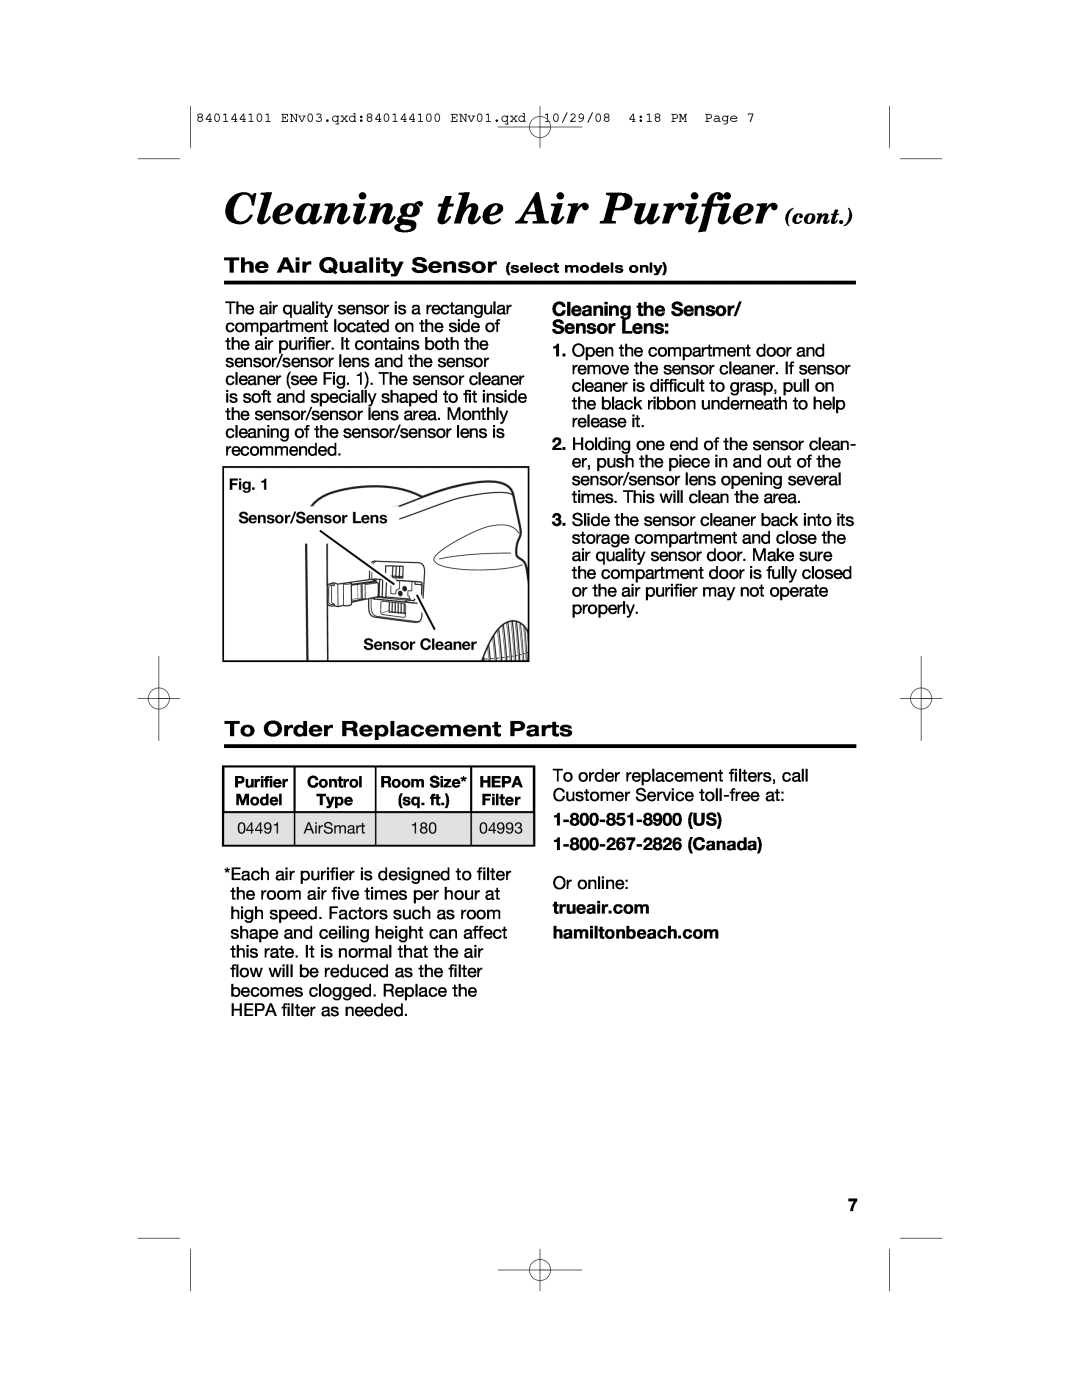 Hamilton Beach 840144101 manual Cleaning the Air Purifier cont, The Air Quality Sensor select models only 